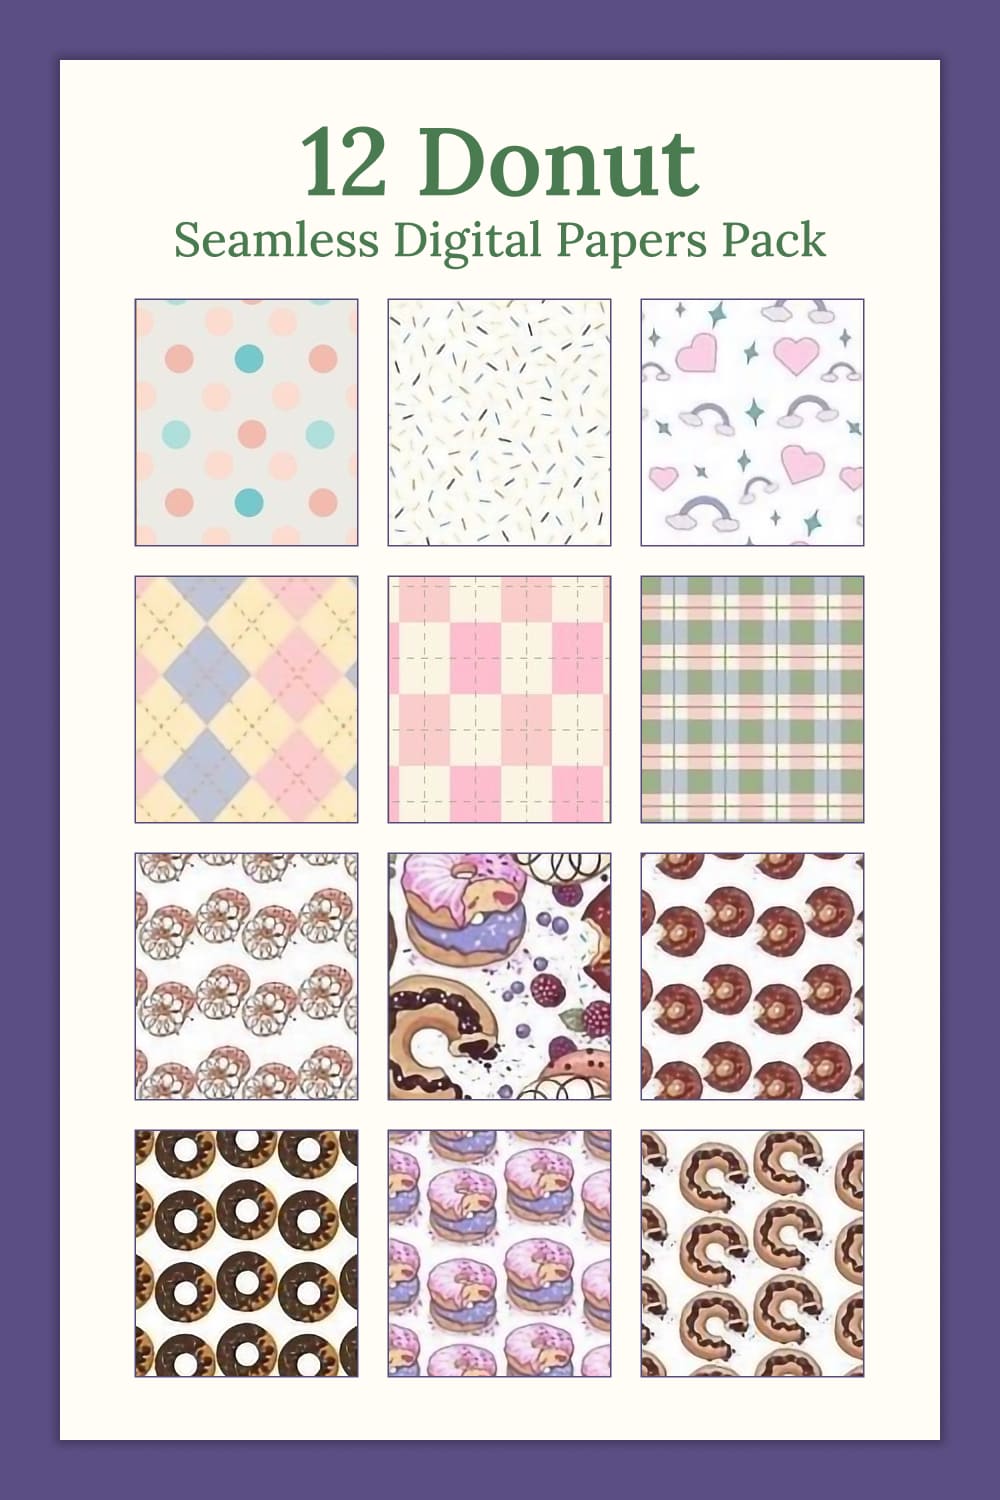 12 Donut Seamless Digital Papers Pack - Pinterest.